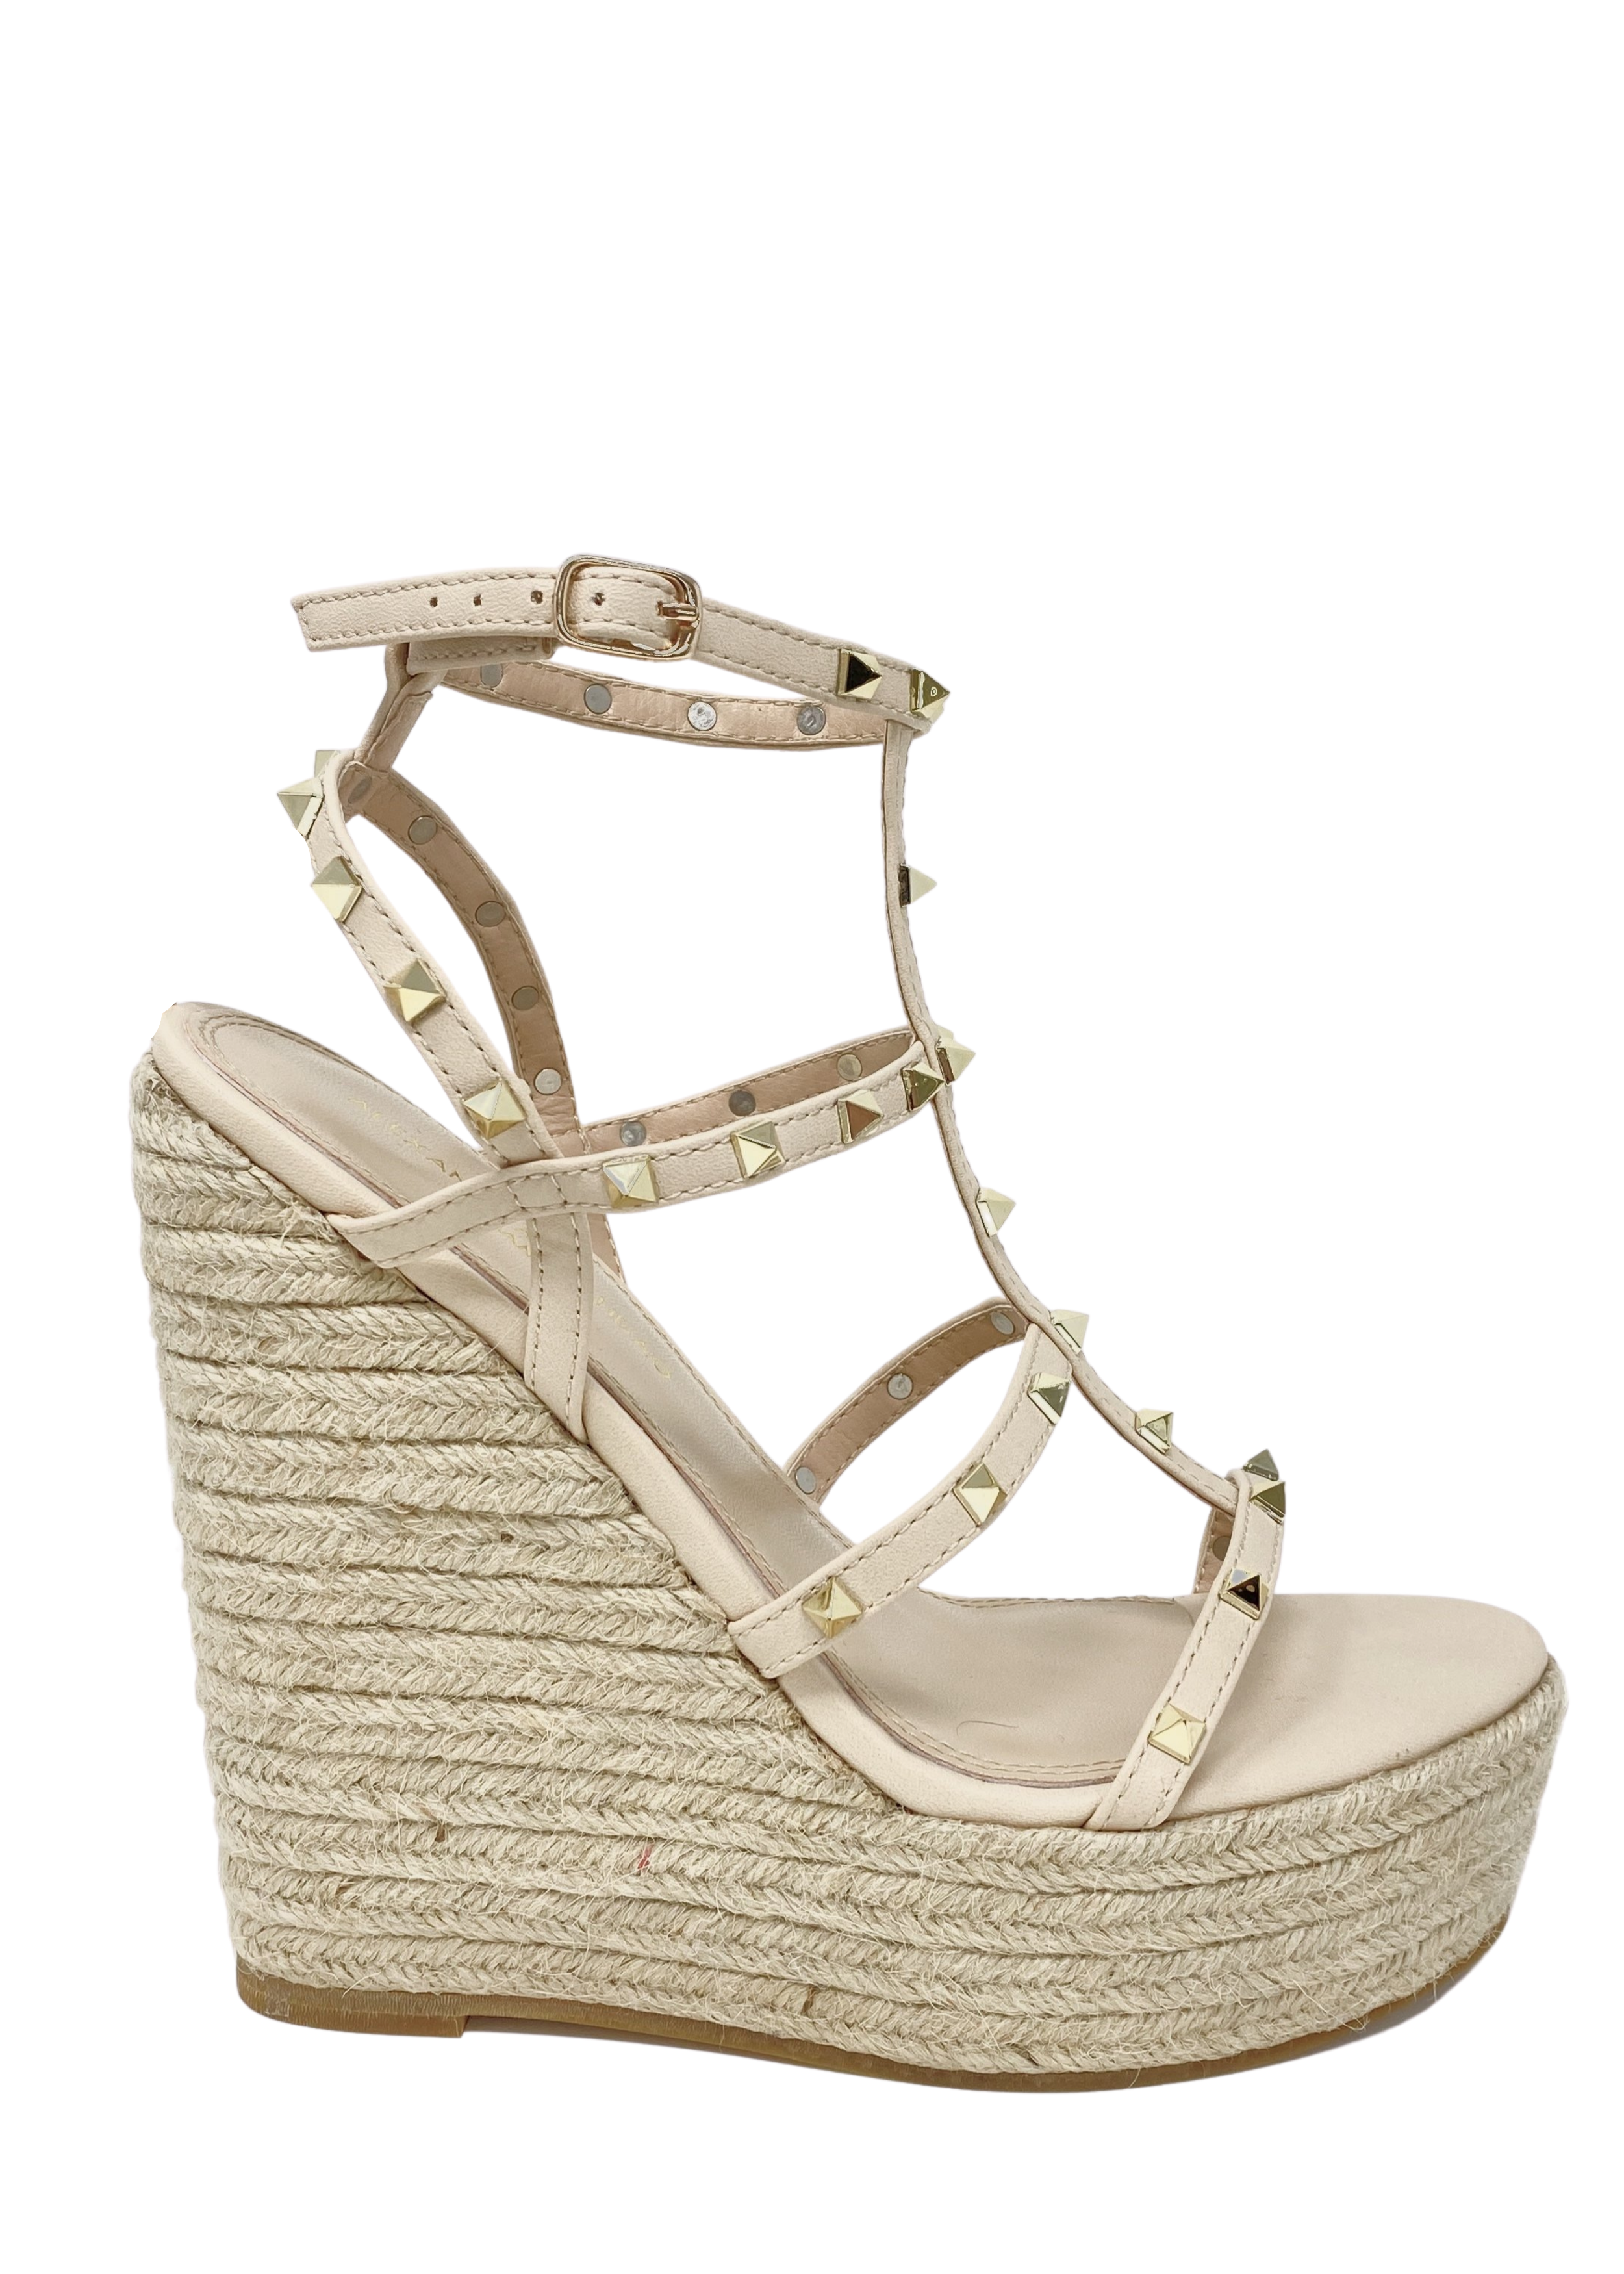 Astrid Espadrille Wedges in Nude that has a espadrille wedge and multi strap gold studded wedge. 